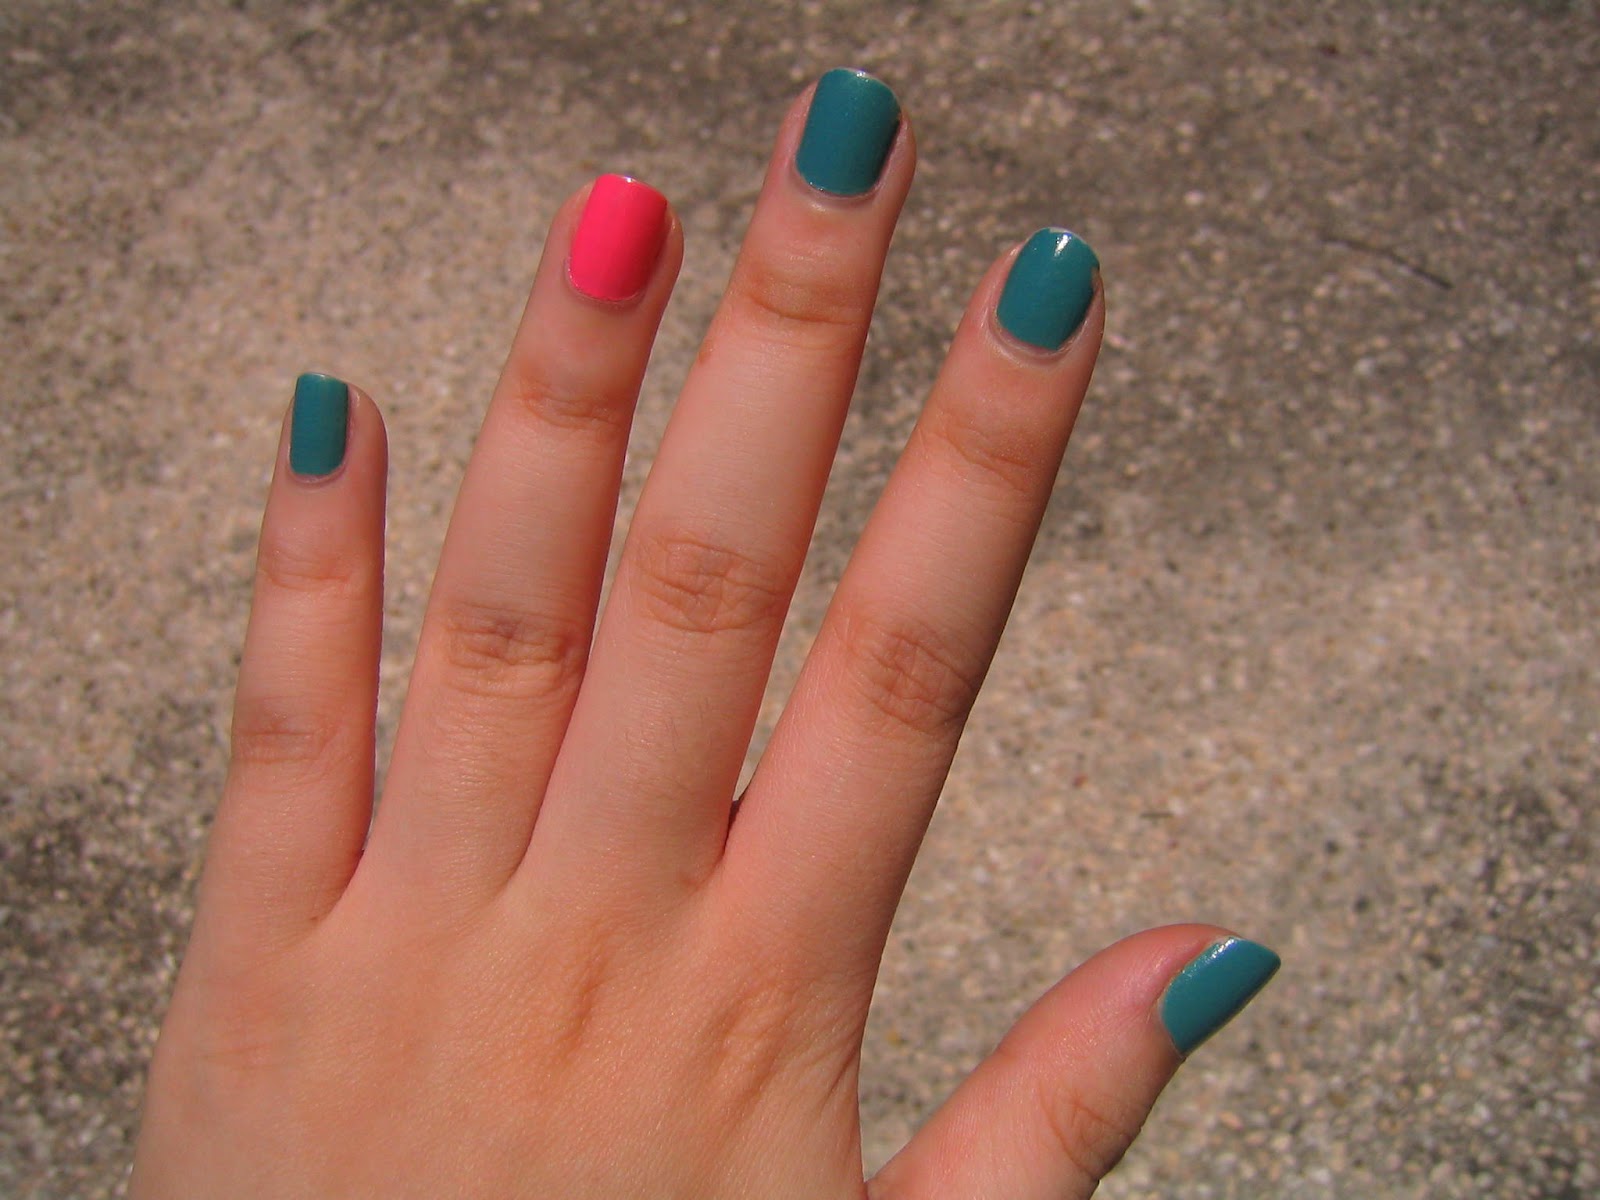 10. "Contrasting nail color on ring finger" - wide 5